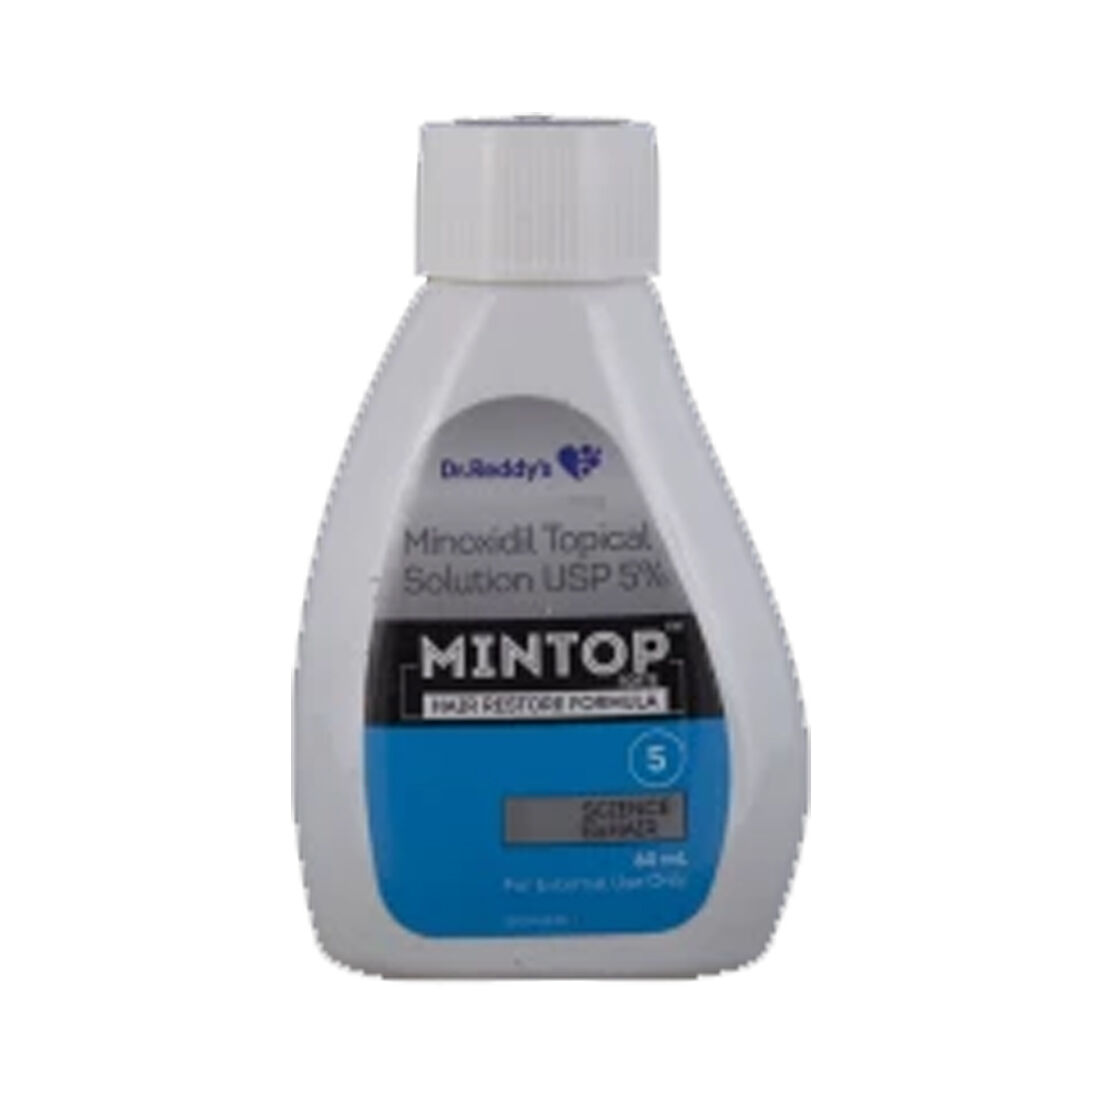 Buy 's Mintop Topical Solution Online at Best Price